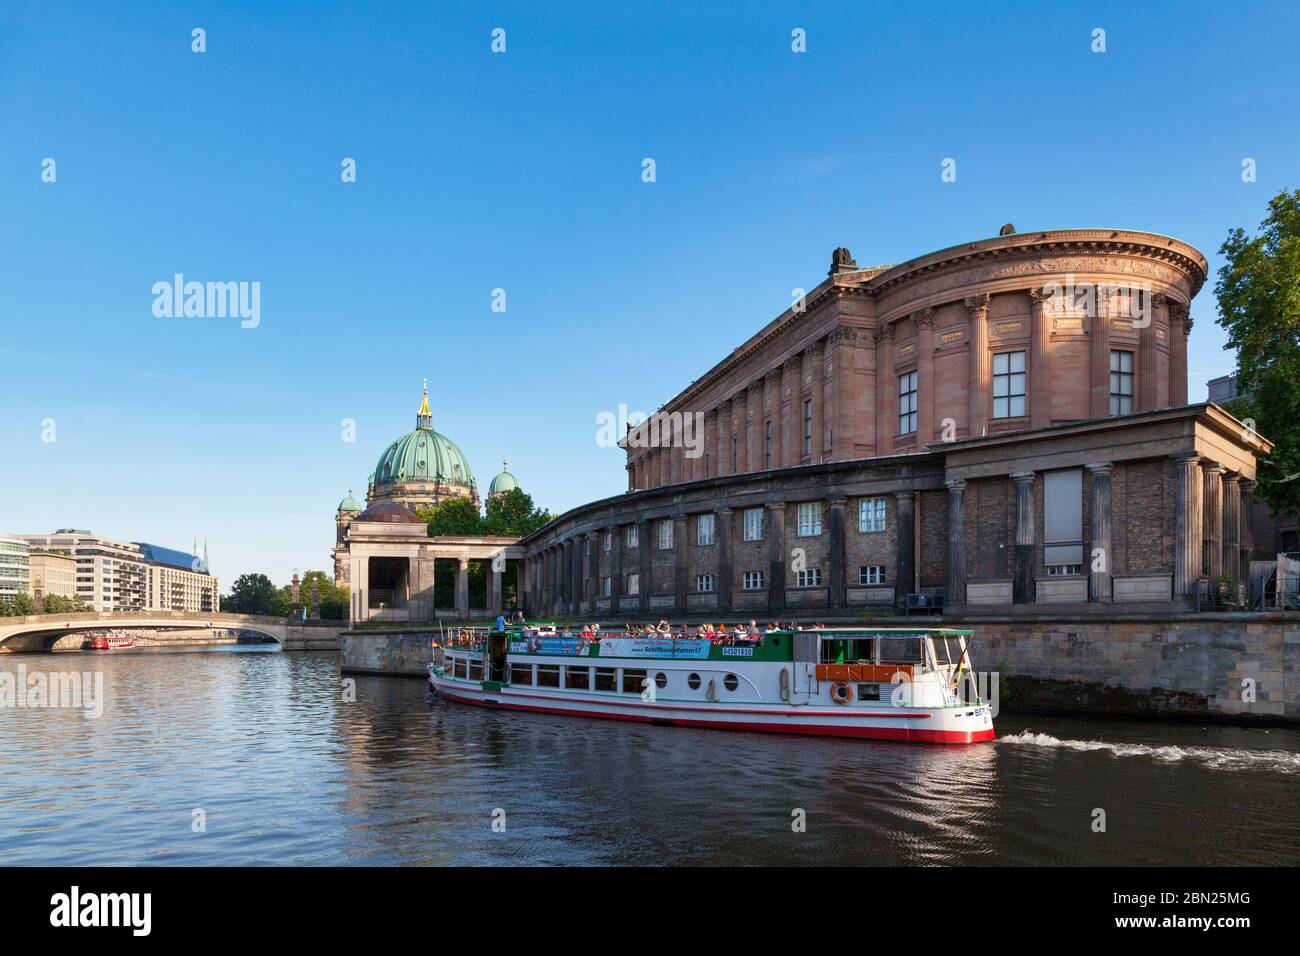 Berlin, Germany - June 02 2019: Boat passing in front of the Alte Nationalgalerie (Old National Gallery) with behind, the Friedrichs Bridge (Friedrich Stock Photo